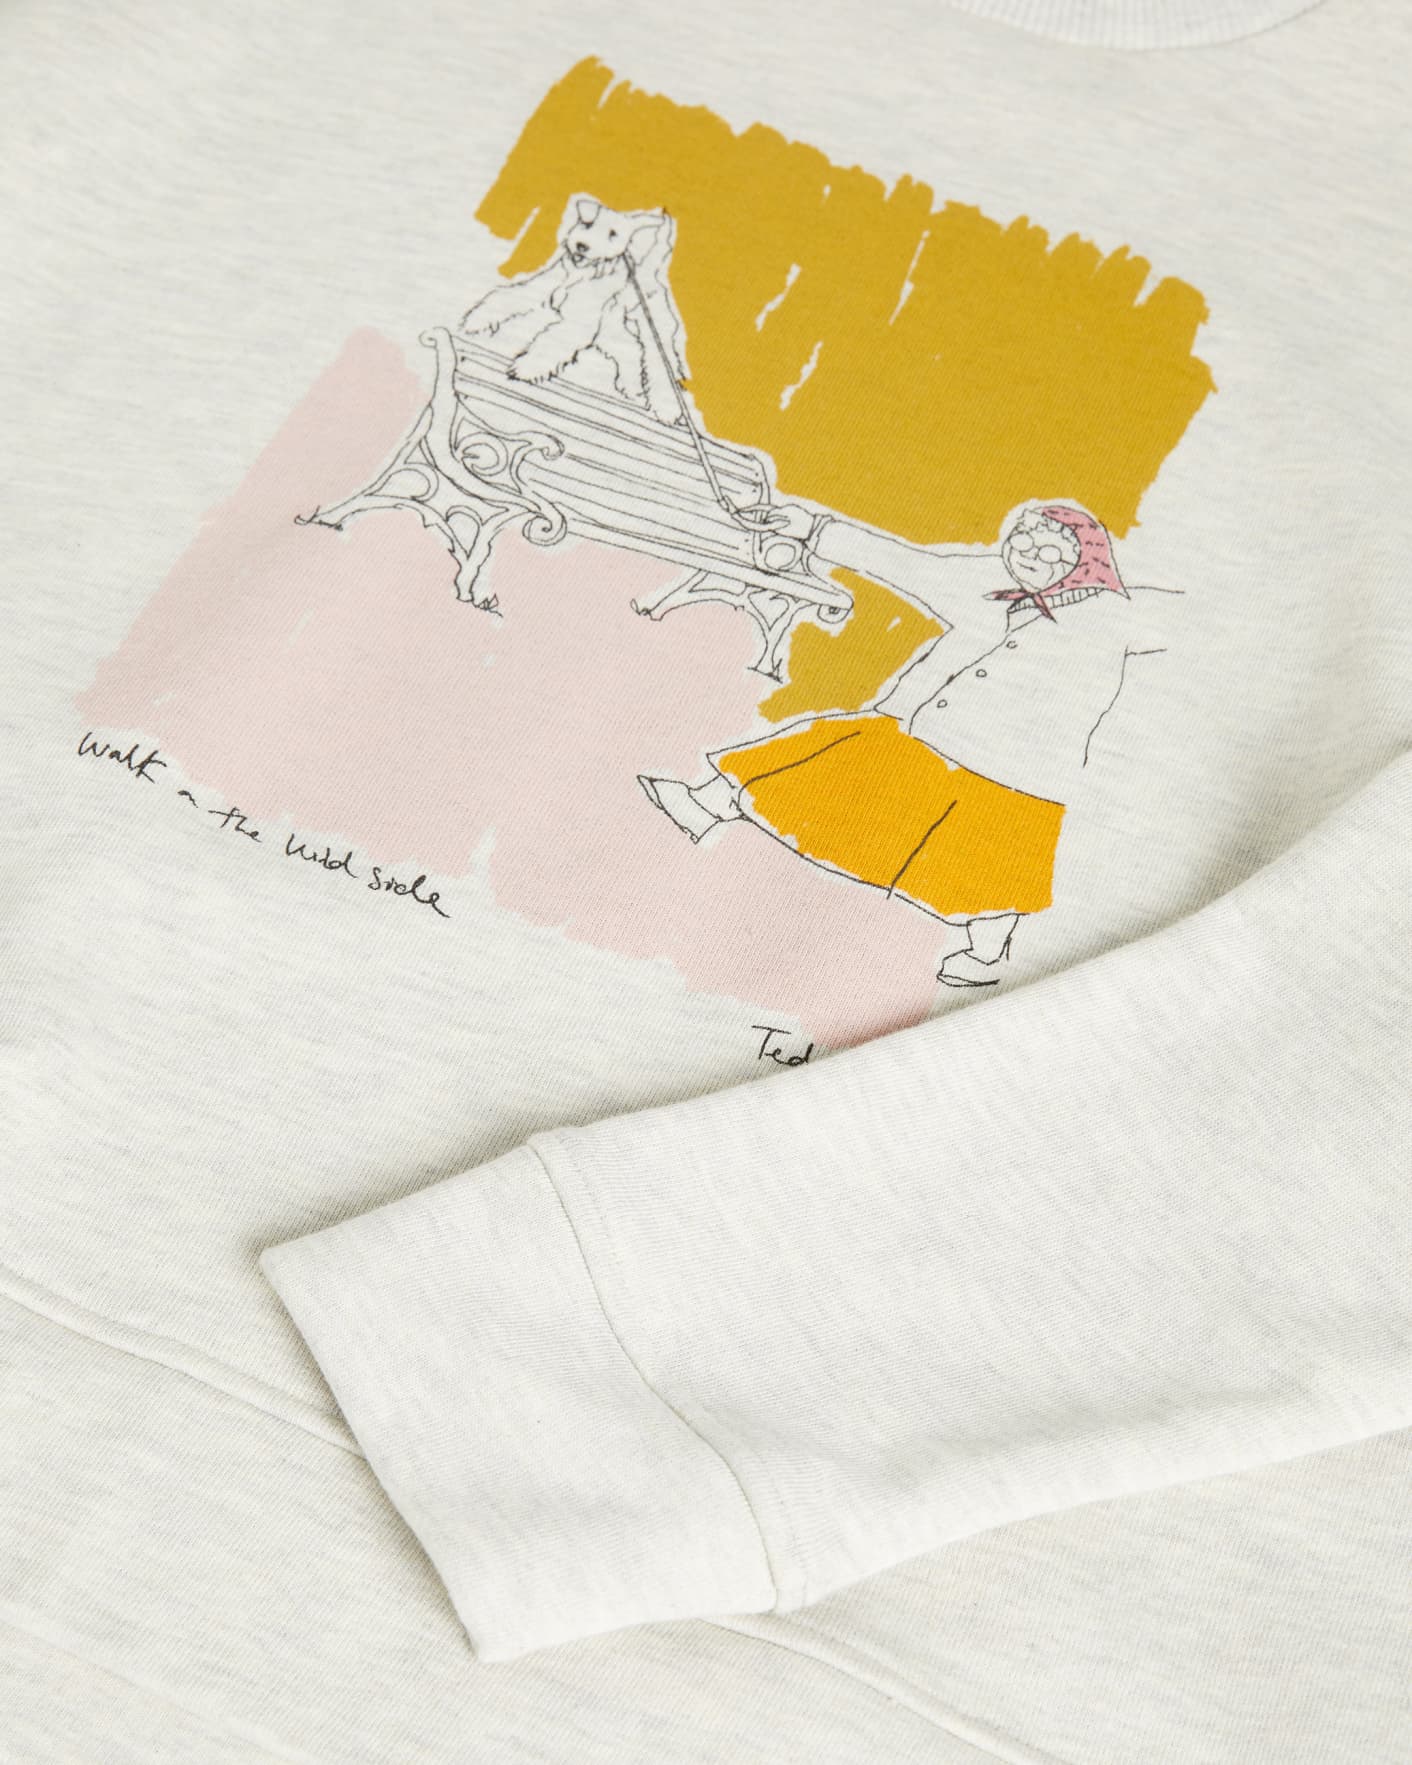 Grey-Marl Graphic Sweat Ted Baker